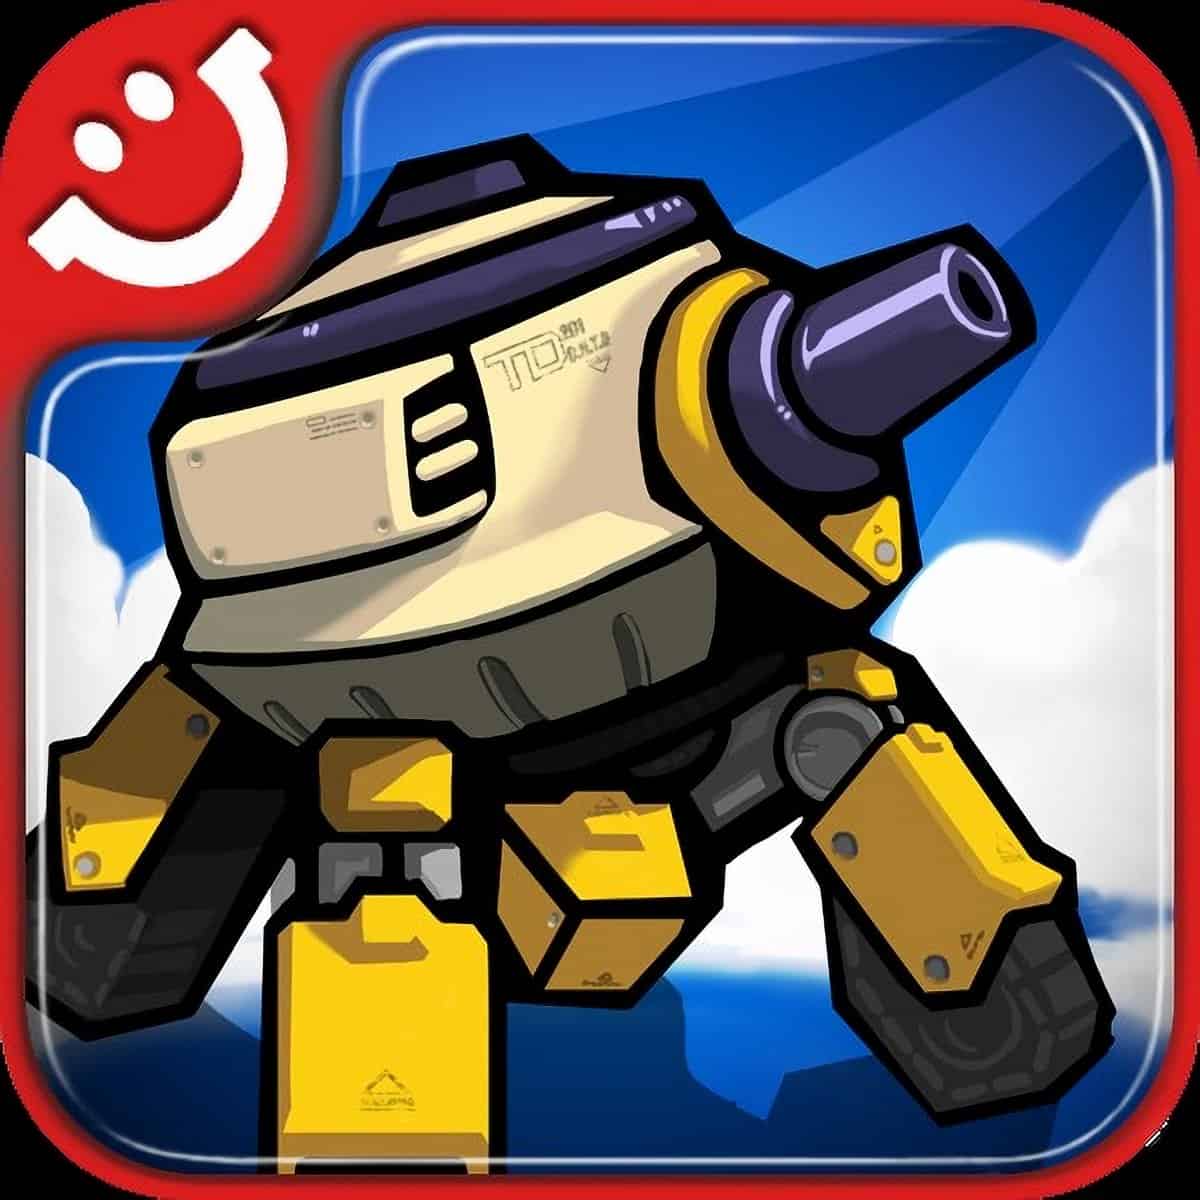 upscale-Tower-Defense-Android Jogo Grátis para Android - Tower Defense